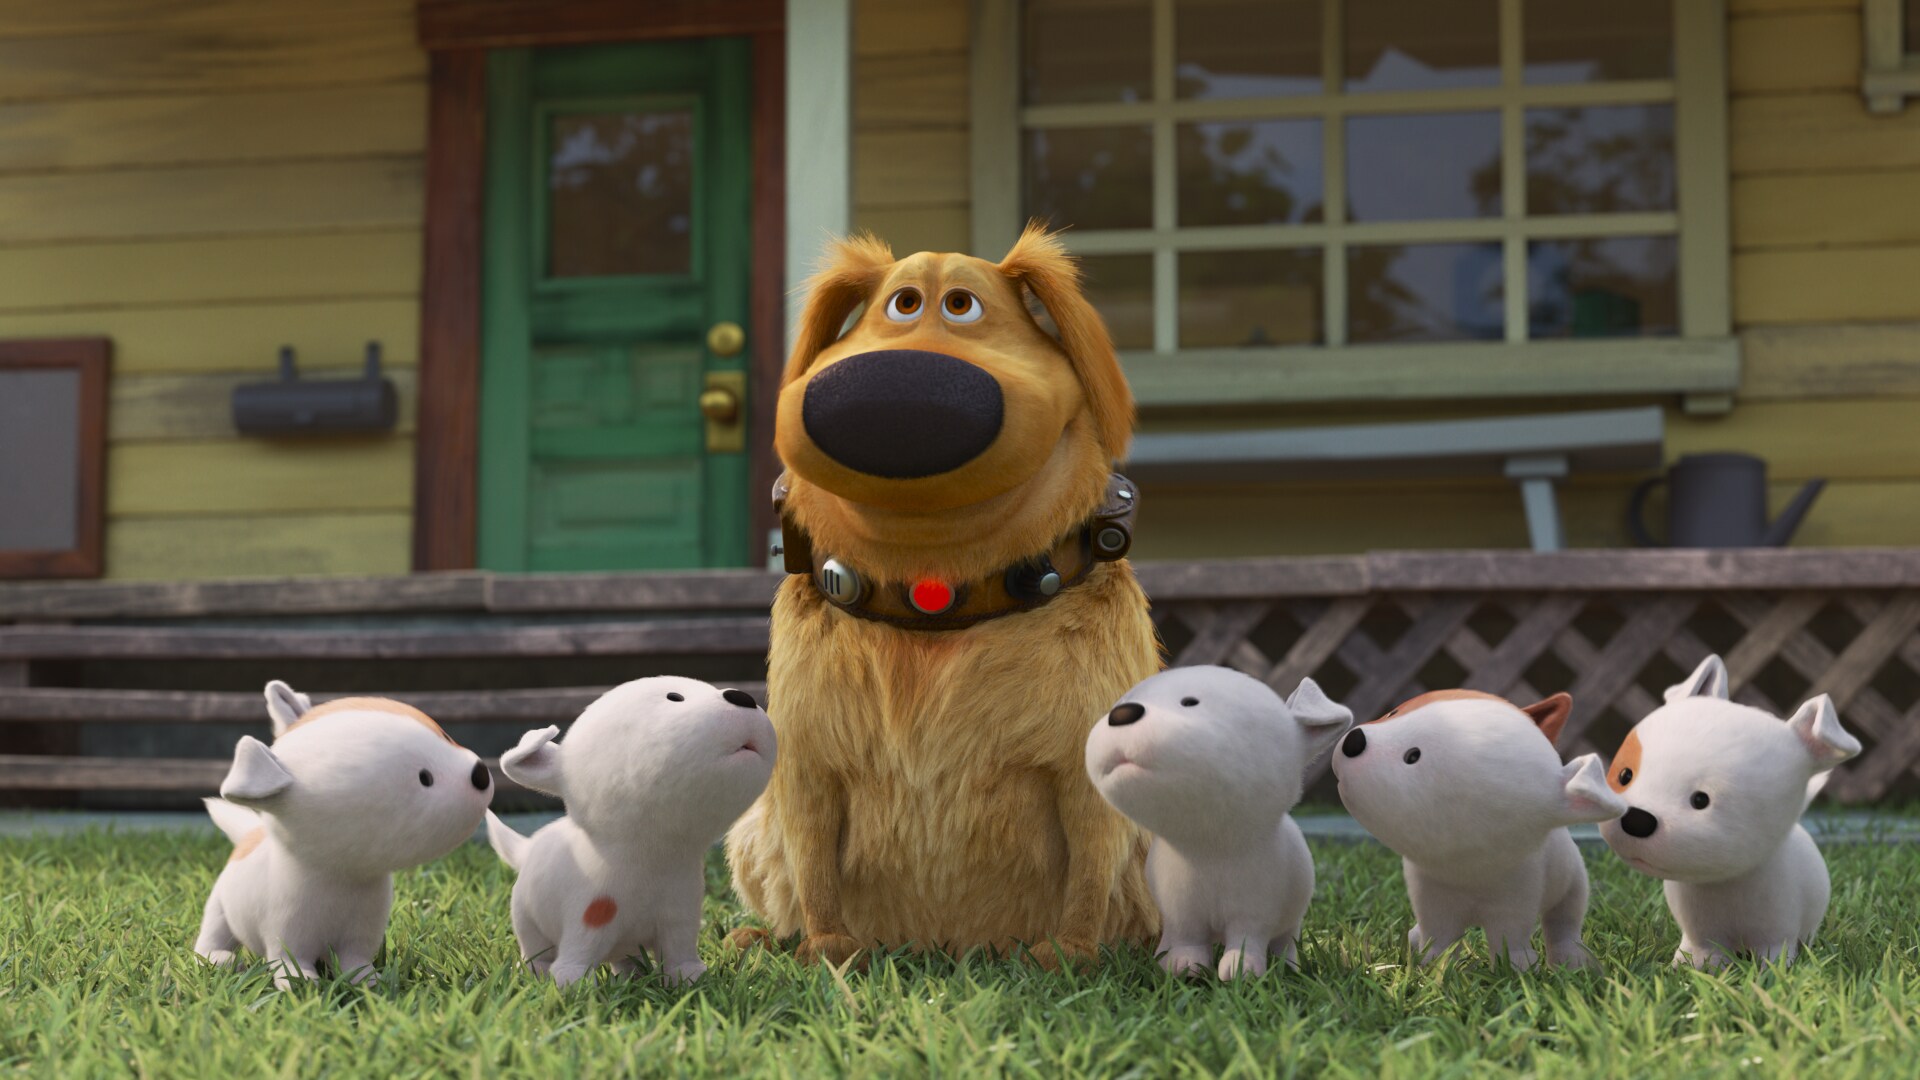 PUPPIES! -- Pixar Animation Studios’ “Dug Days” is a new collection of shorts that follows the humorous misadventures of Dug, the lovable dog from Disney and Pixar’s “Up.” Each short features everyday events that occur in and around Dug's backyard—like taking care of a litter of puppies for a day (it is hard work). Written and directed by Academy Award® nominee and Emmy® Award winner Bob Peterson and produced by Kim Collins, the shorts premiere exclusively on Disney+ in Fall 2021. © 2021 Disney/Pixar. All Rights Reserved.